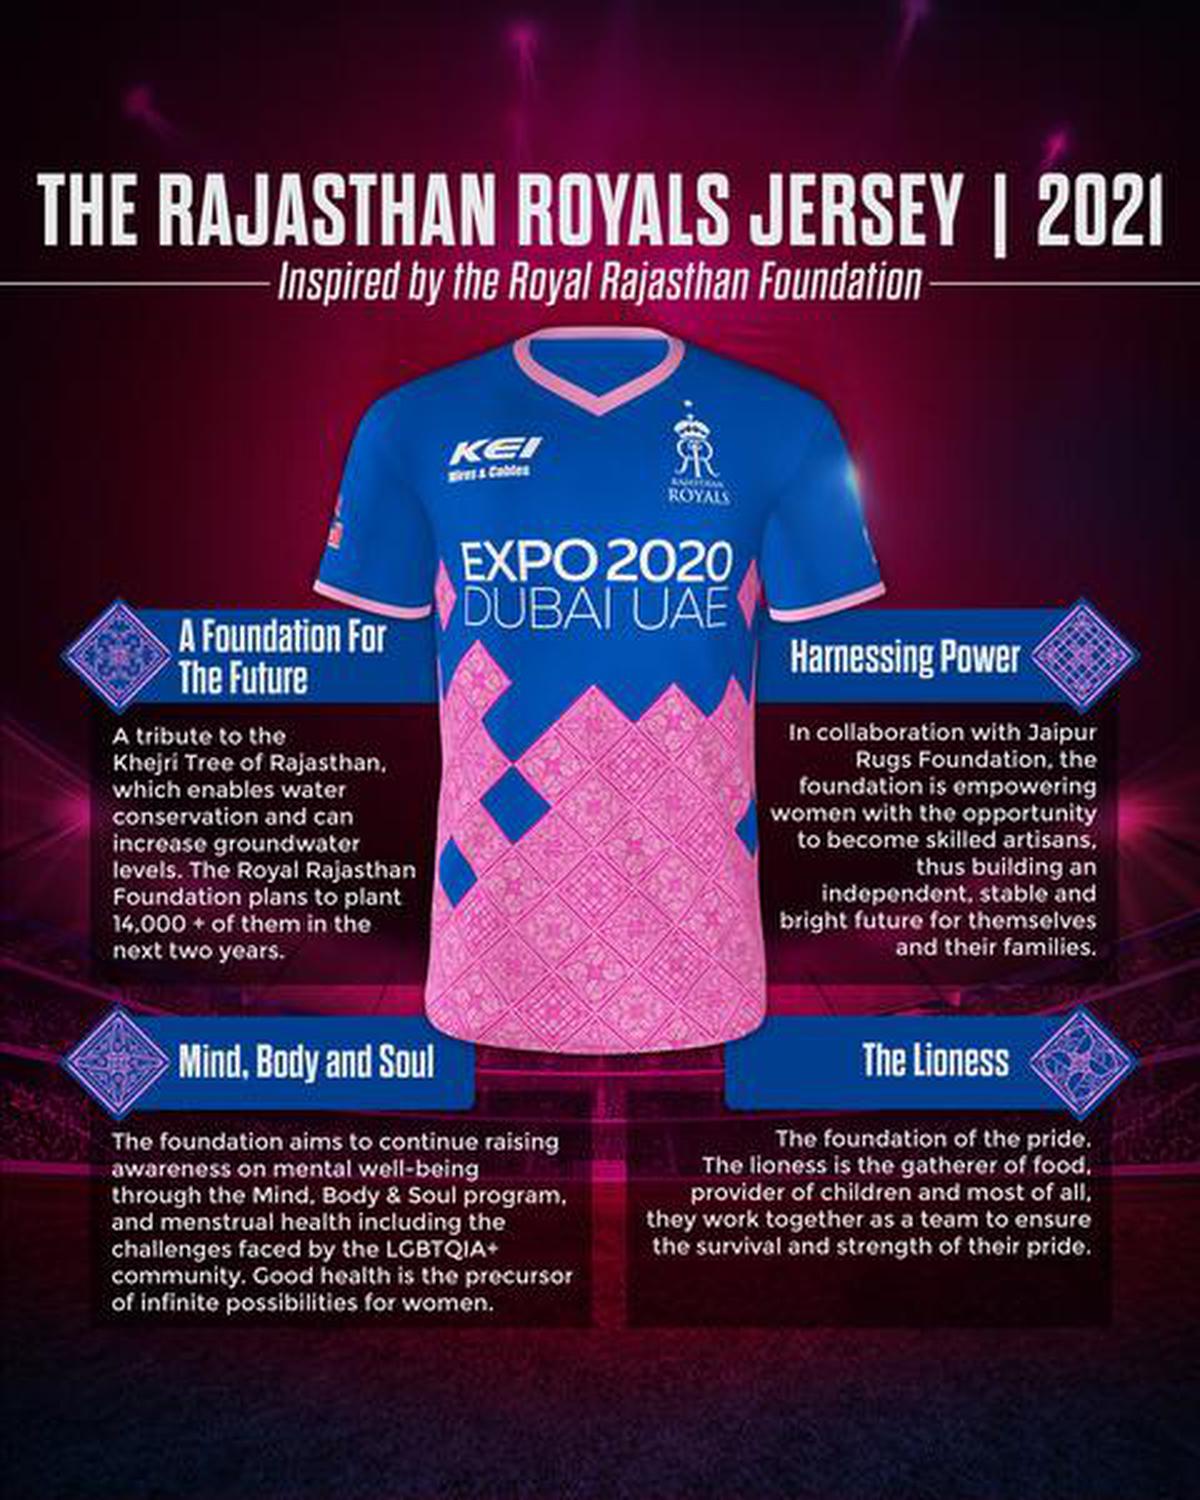 Rajasthan Royals host spectacular stadium live show to launch 2021